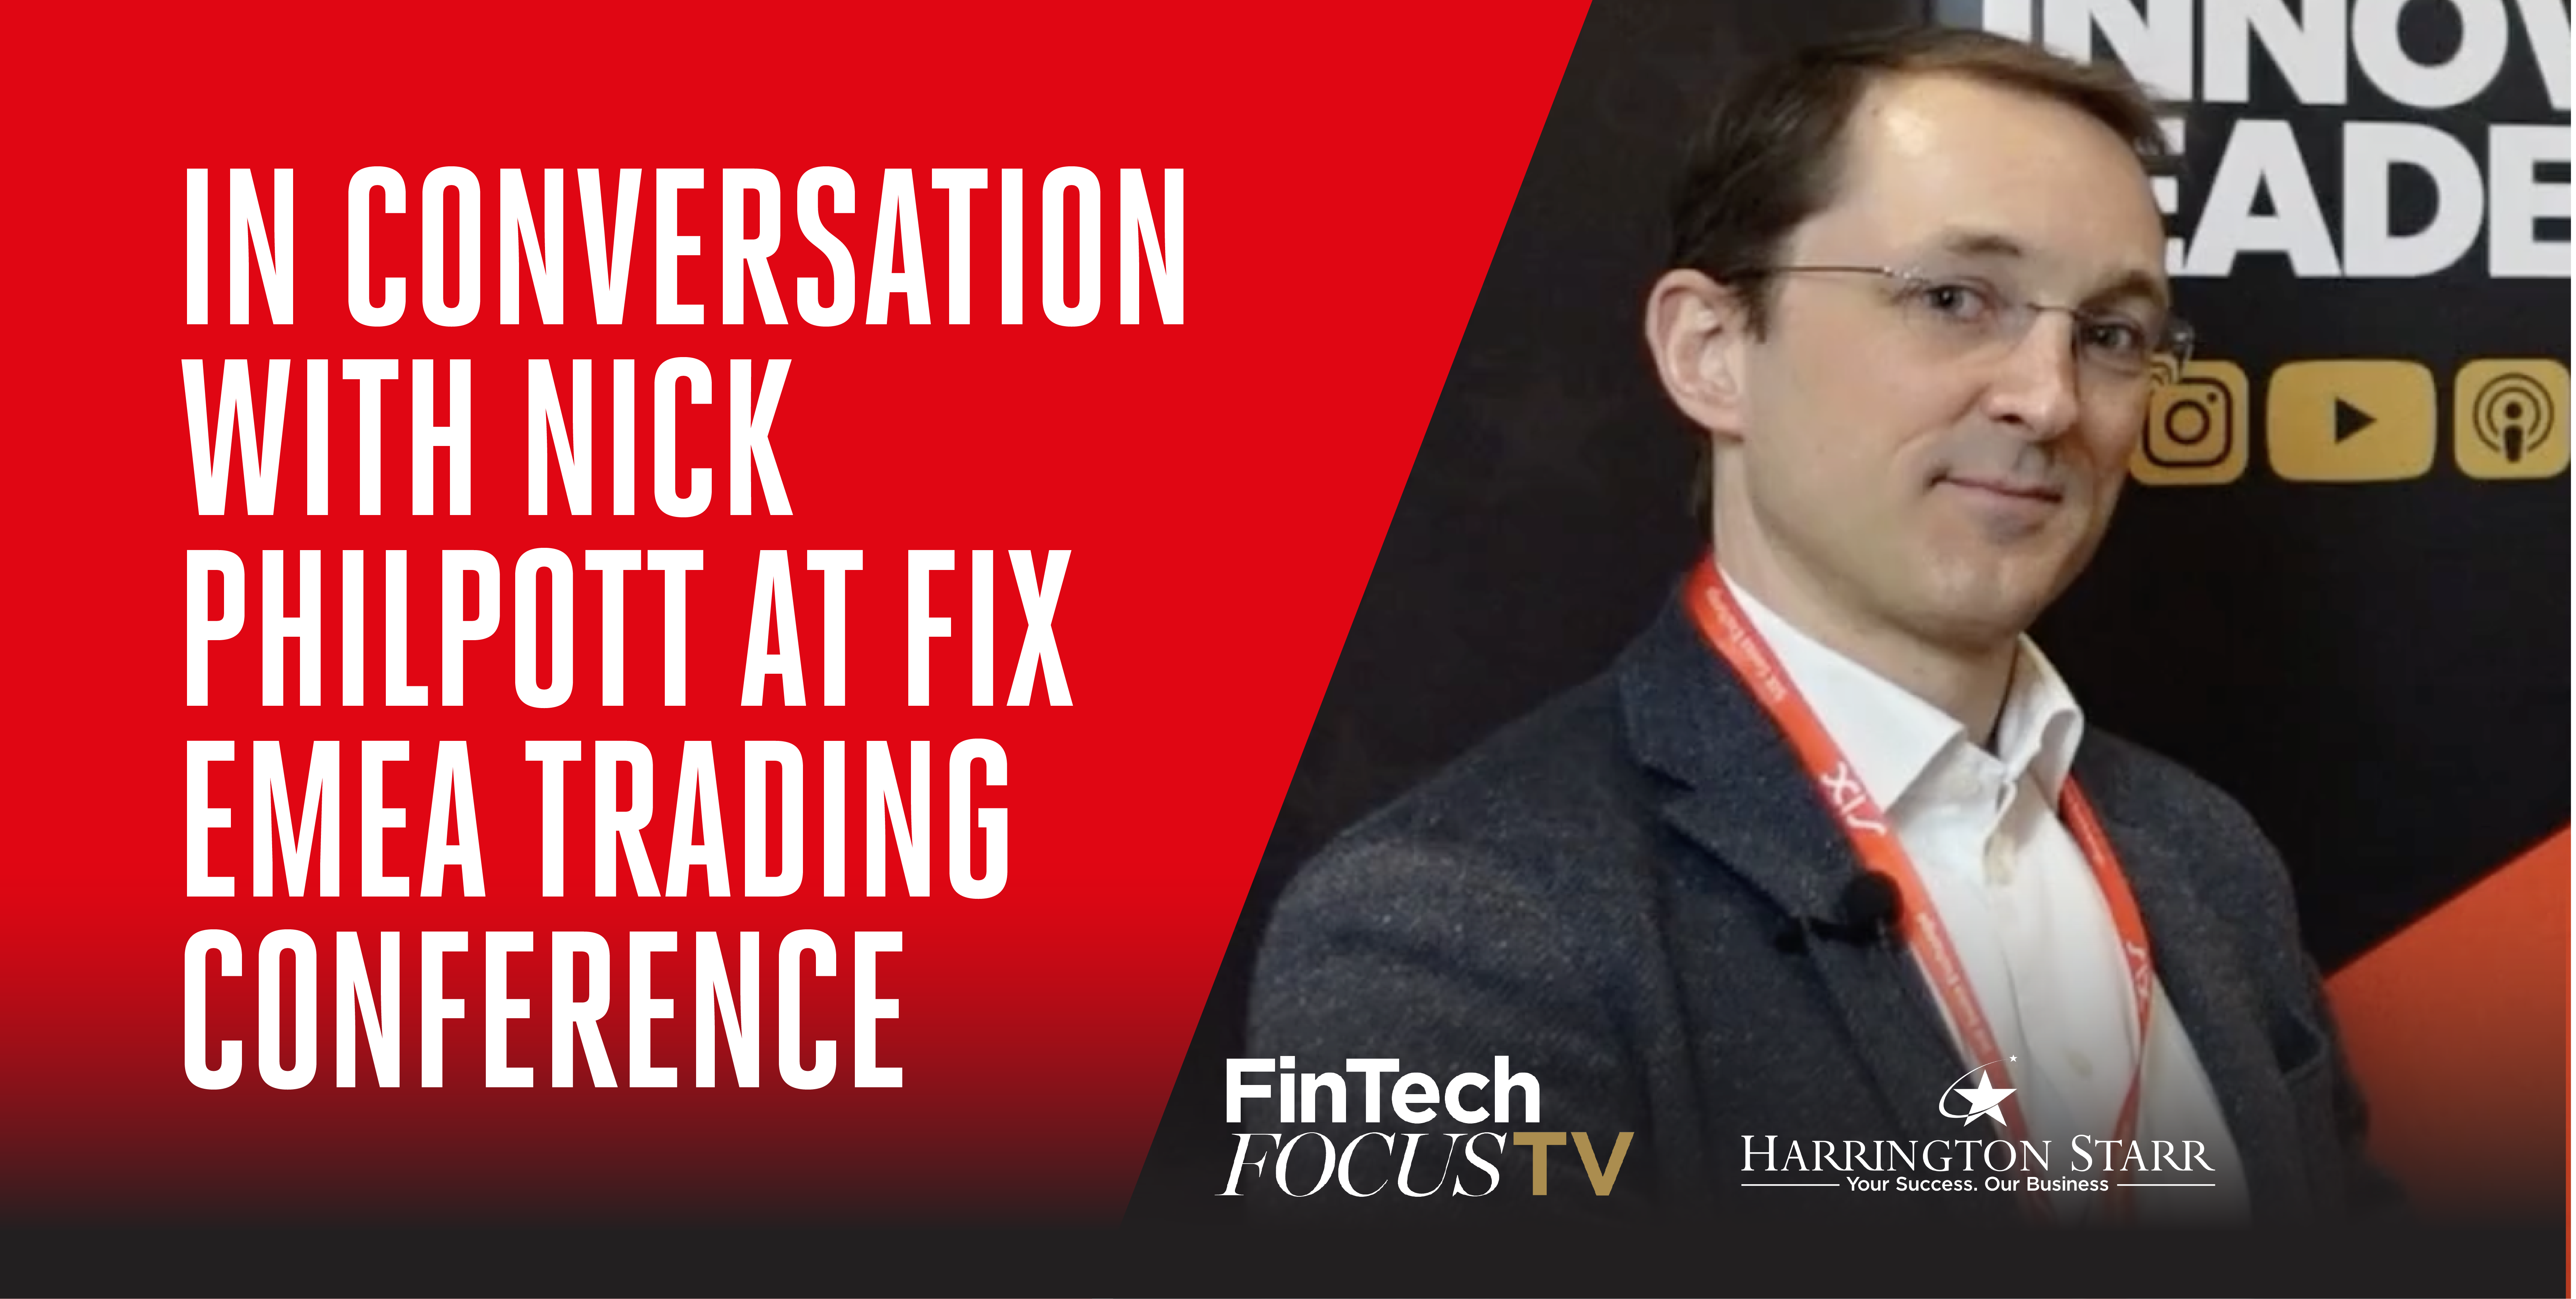 In Conversation with Nick Philpott at FIX EMEA Trading Conference